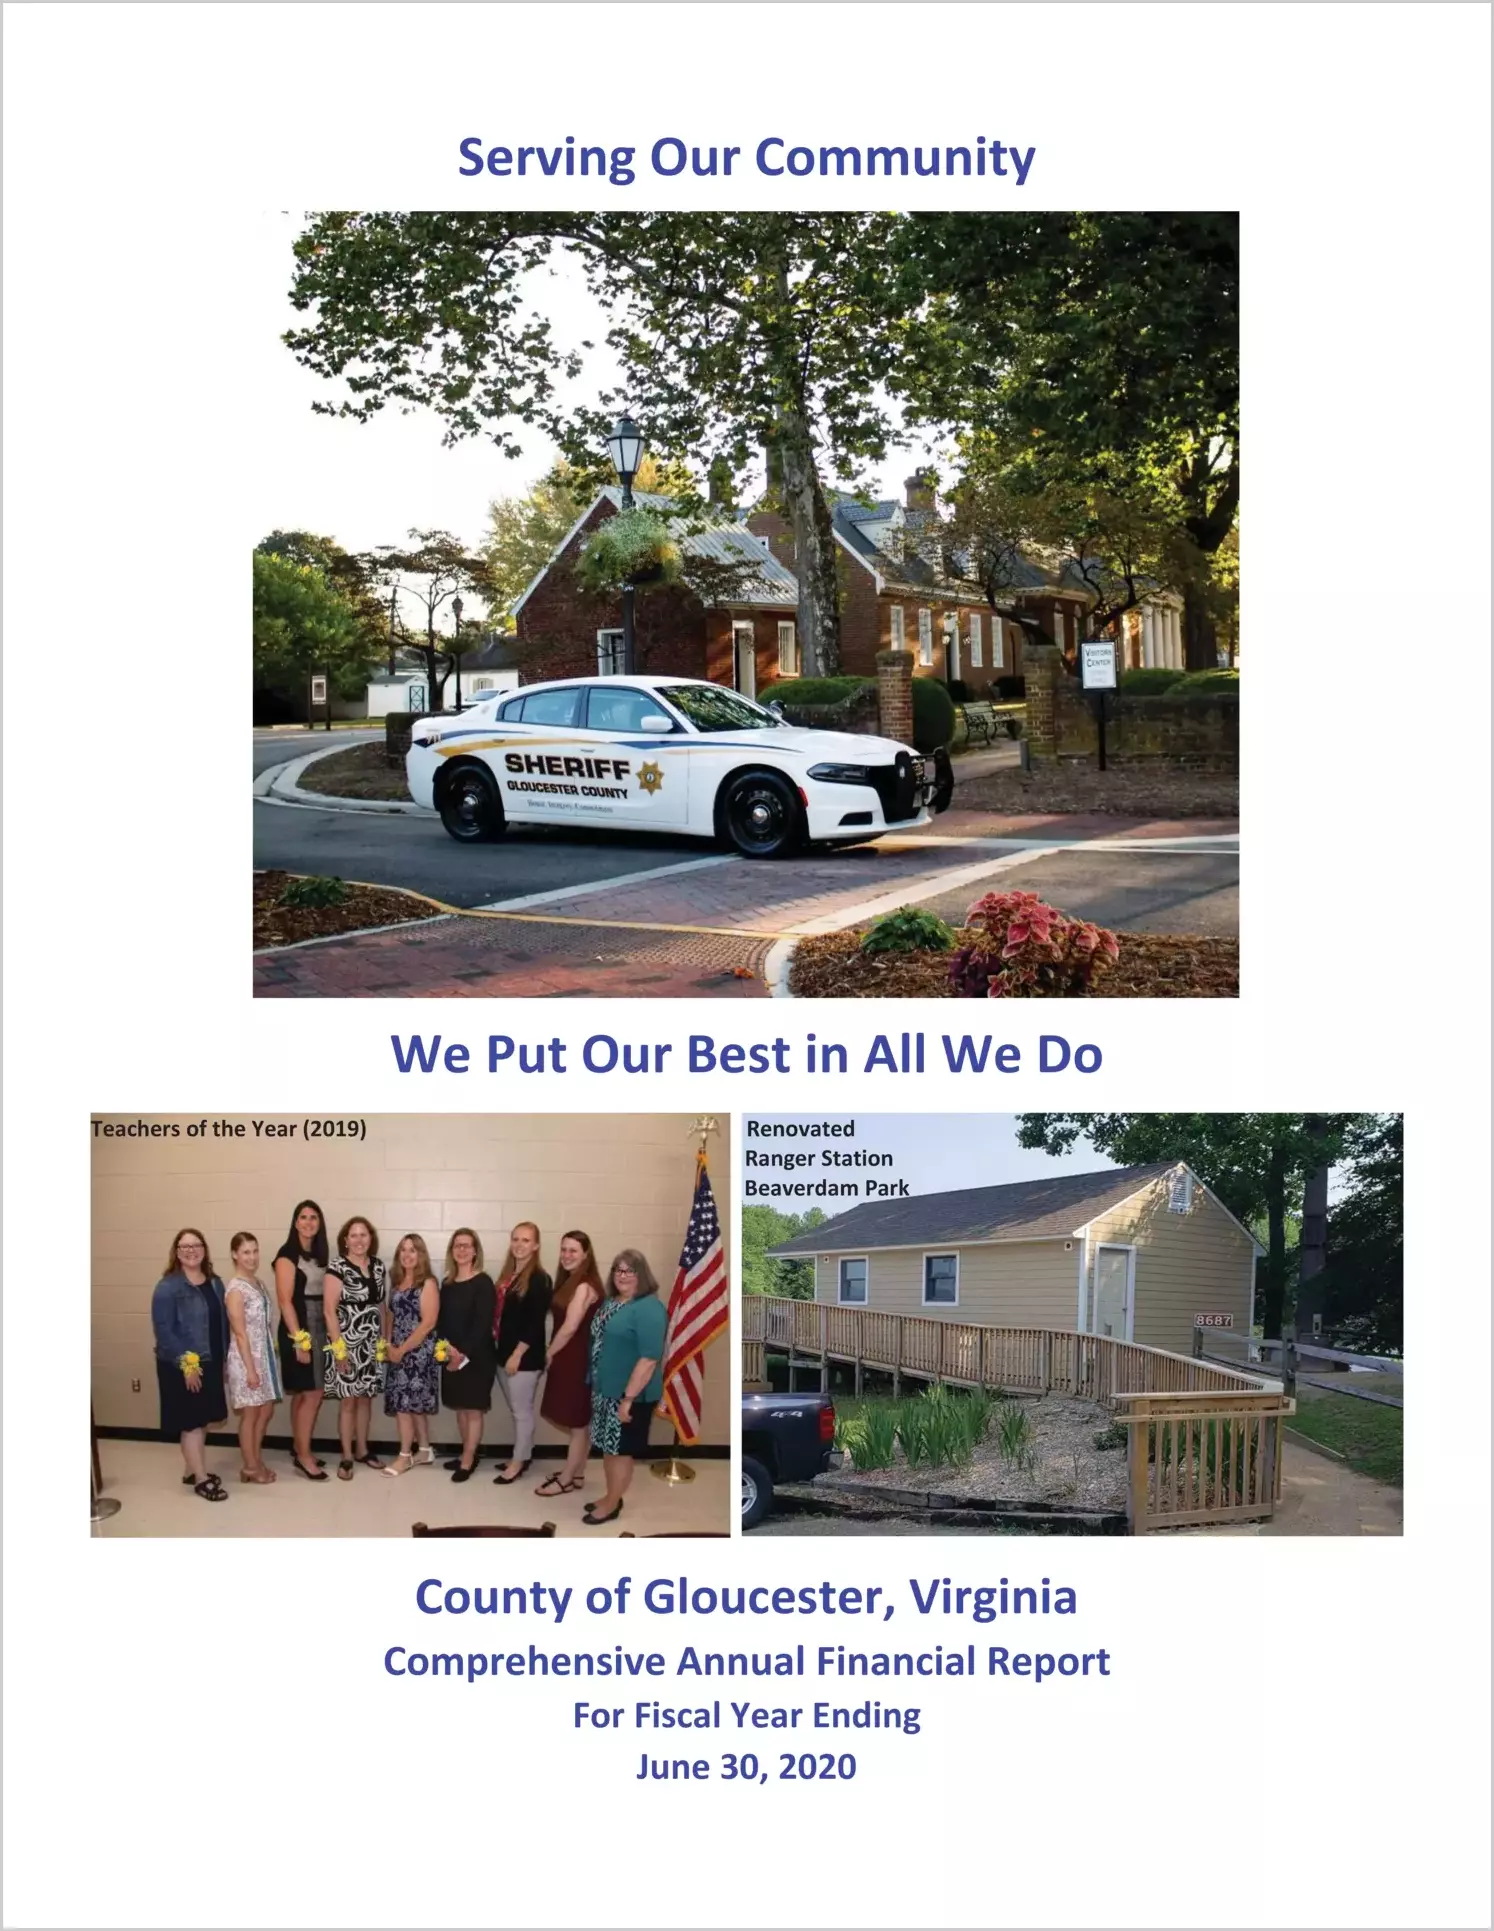 2020 Annual Financial Report for County of Gloucester